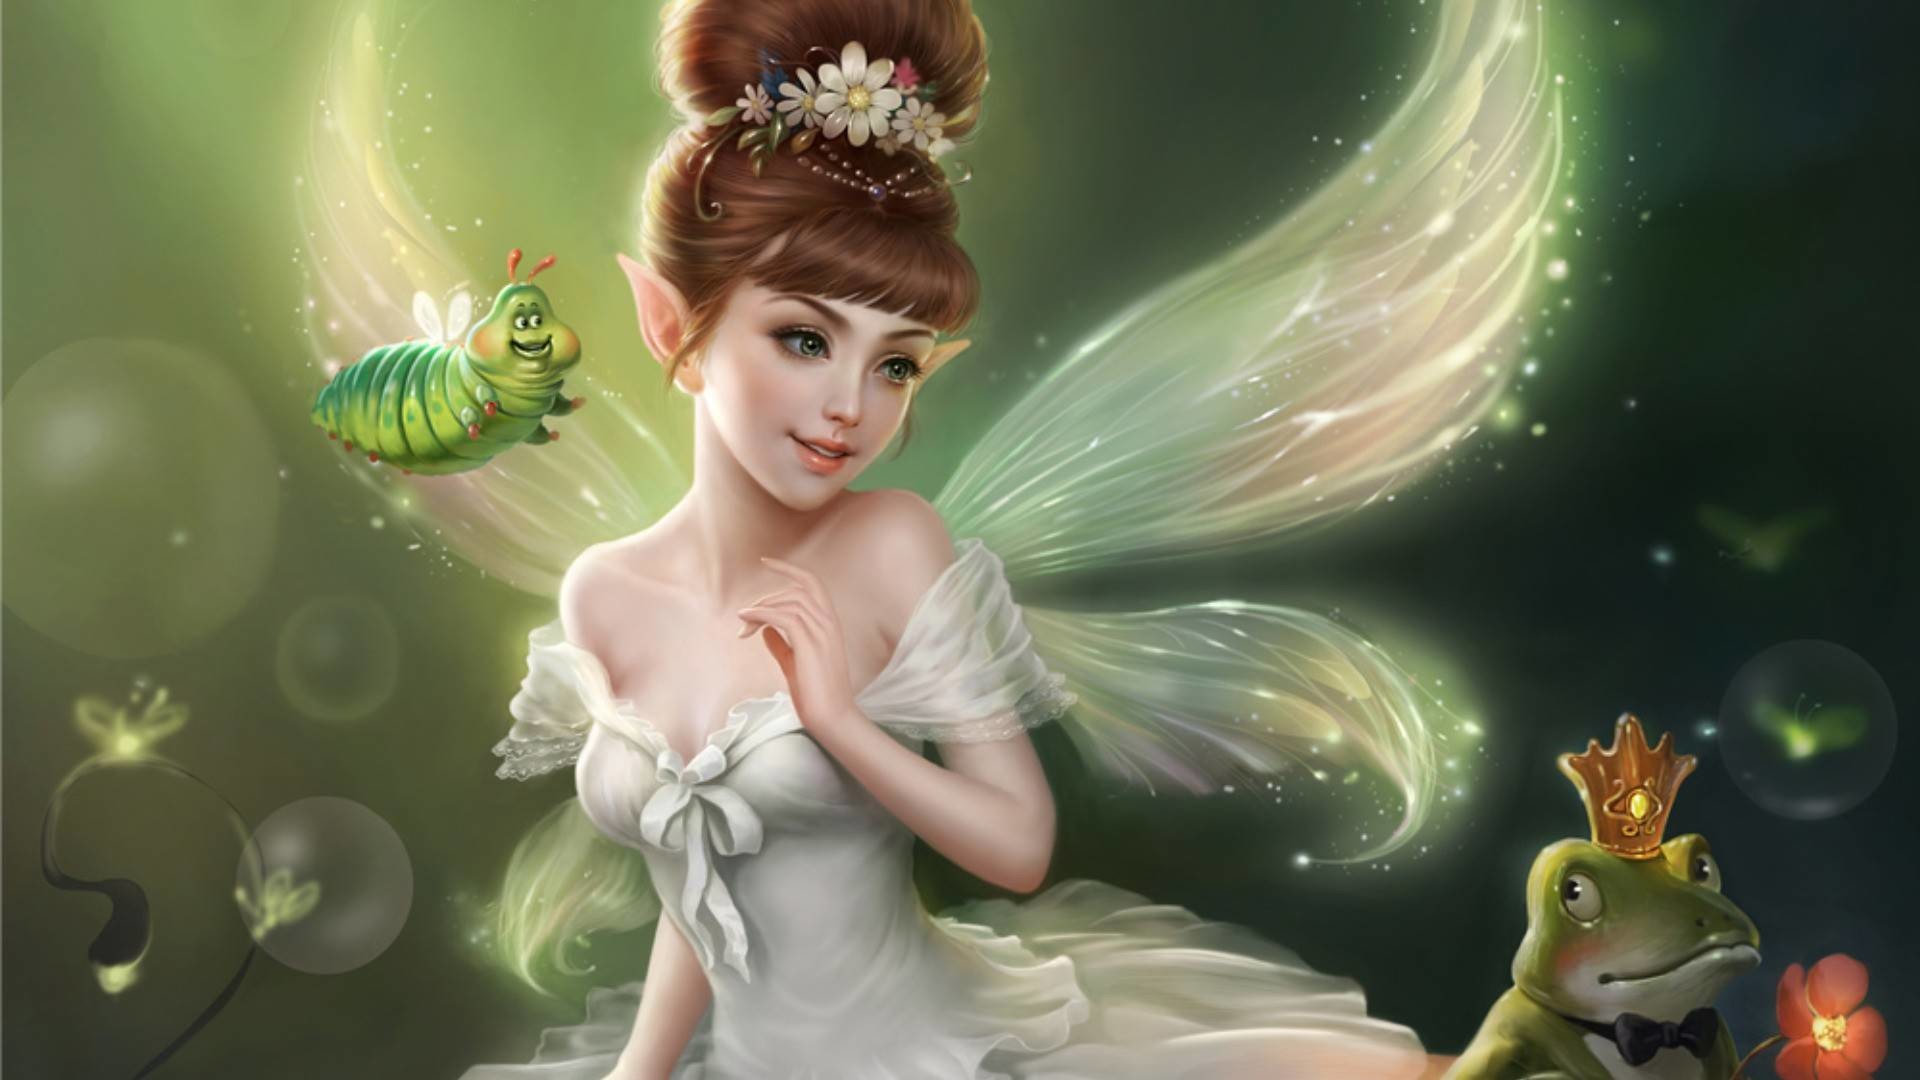 1920x1080 Fantasy - Fairy Wallpapers and Backgrounds